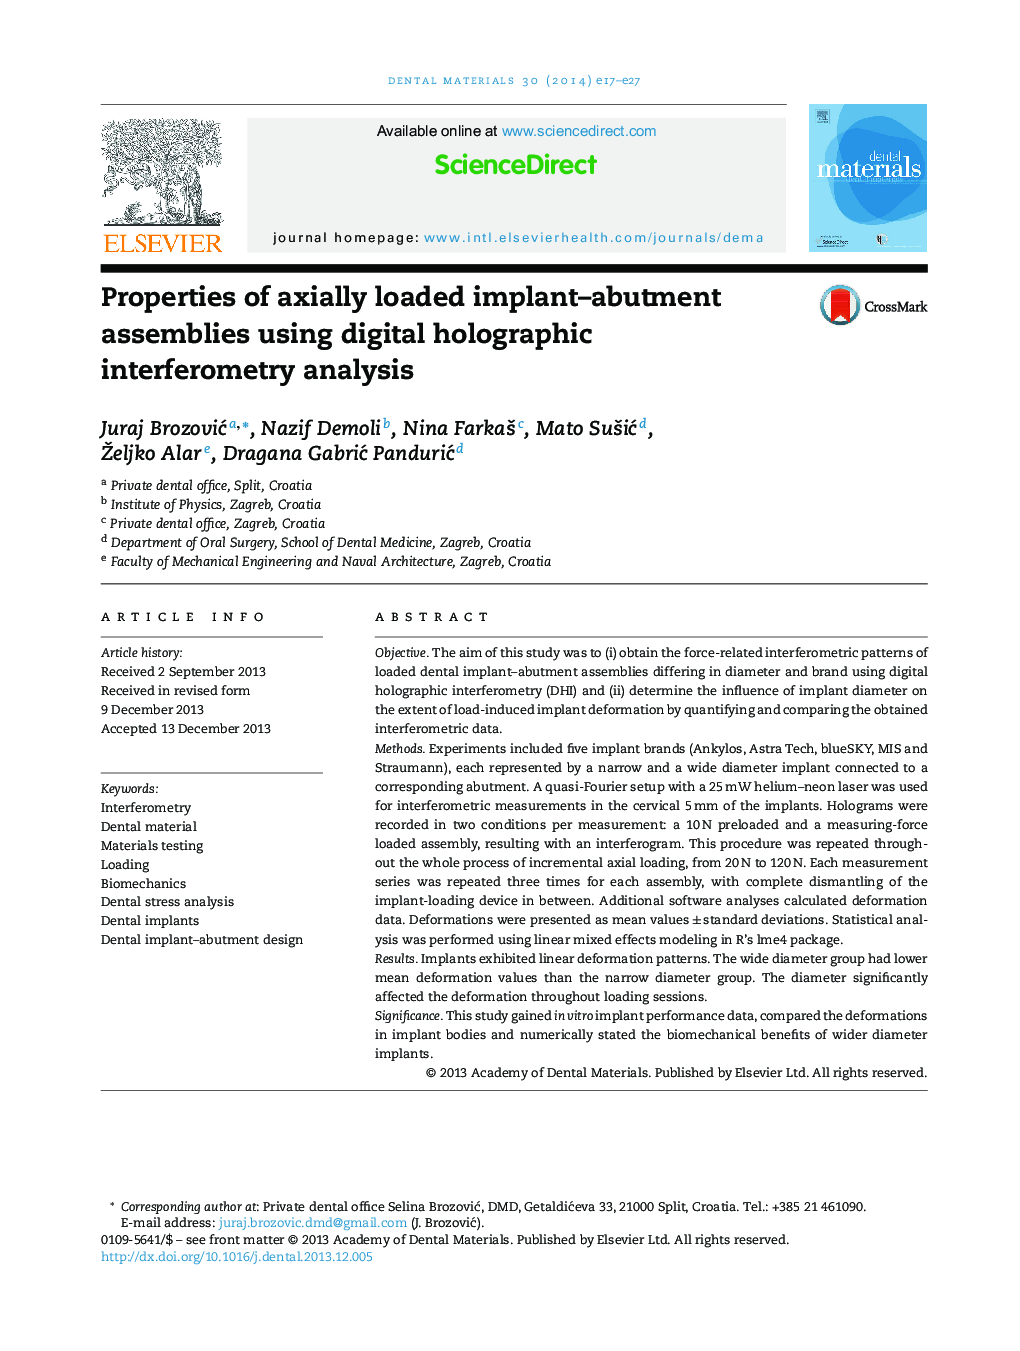 Properties of axially loaded implant–abutment assemblies using digital holographic interferometry analysis